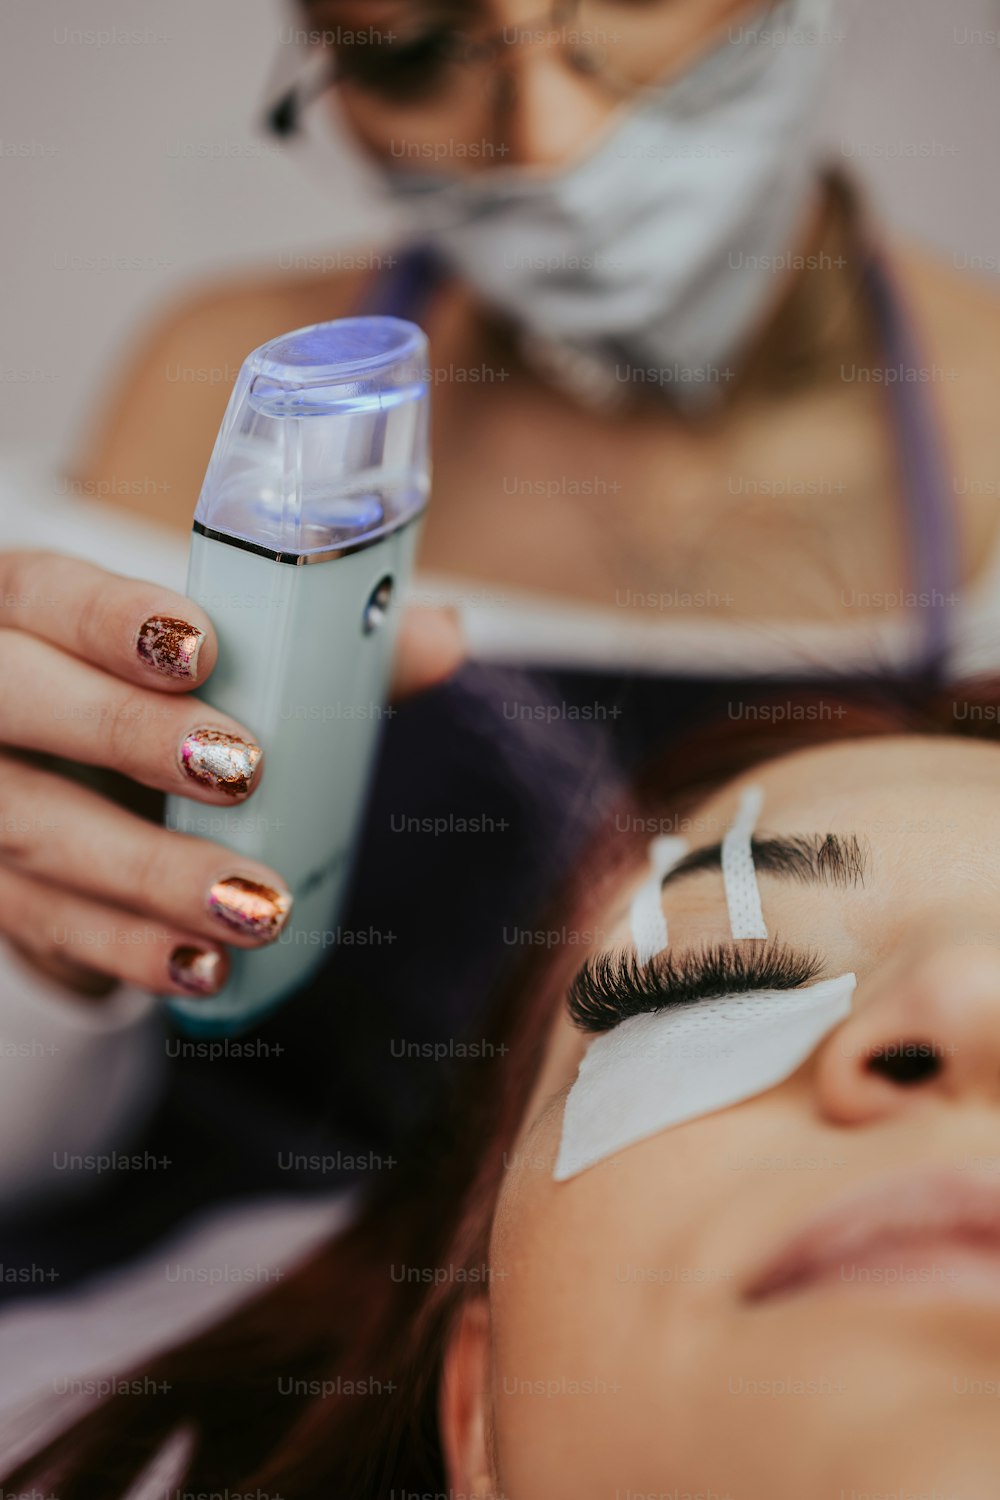 Beautiful young woman at eyelash extension procedure. Cosmetics and body care close up shot. Female beautician wearing protective face mask. Coronavirus stay safe concept.